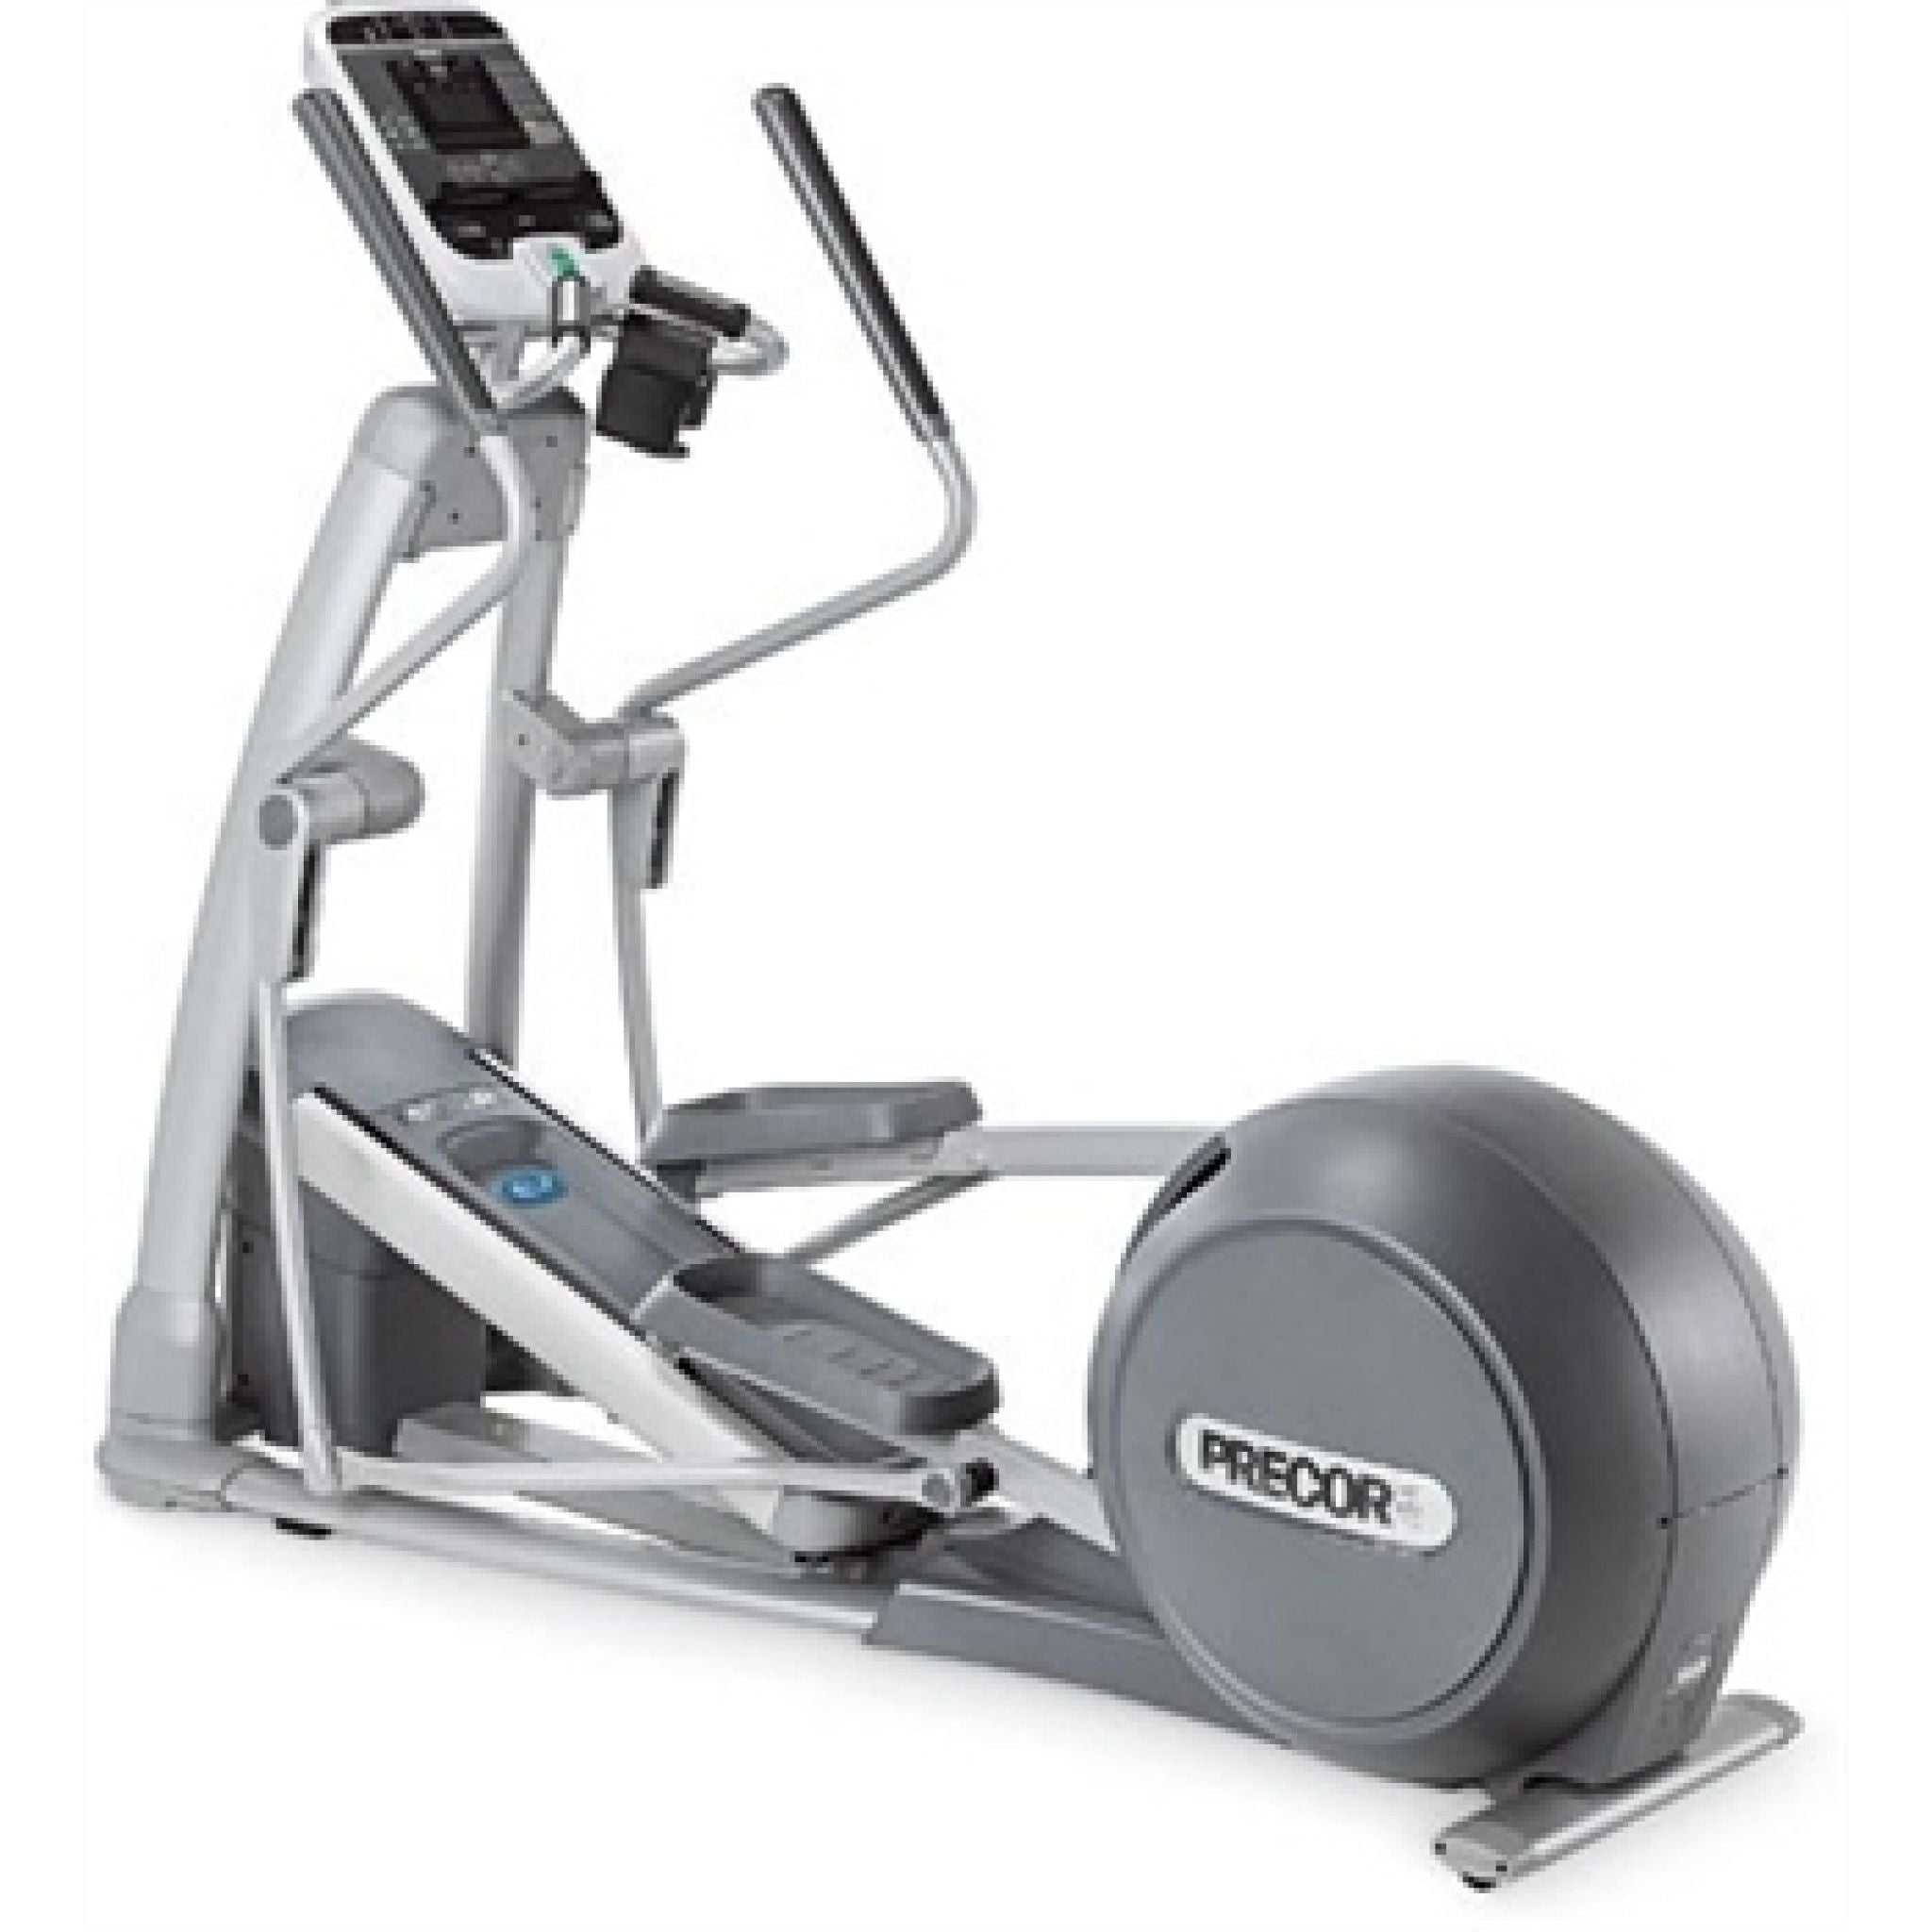 Left side view of the Precor EFX 556i v4 Elliptical with a Cardio Theater TV Screen